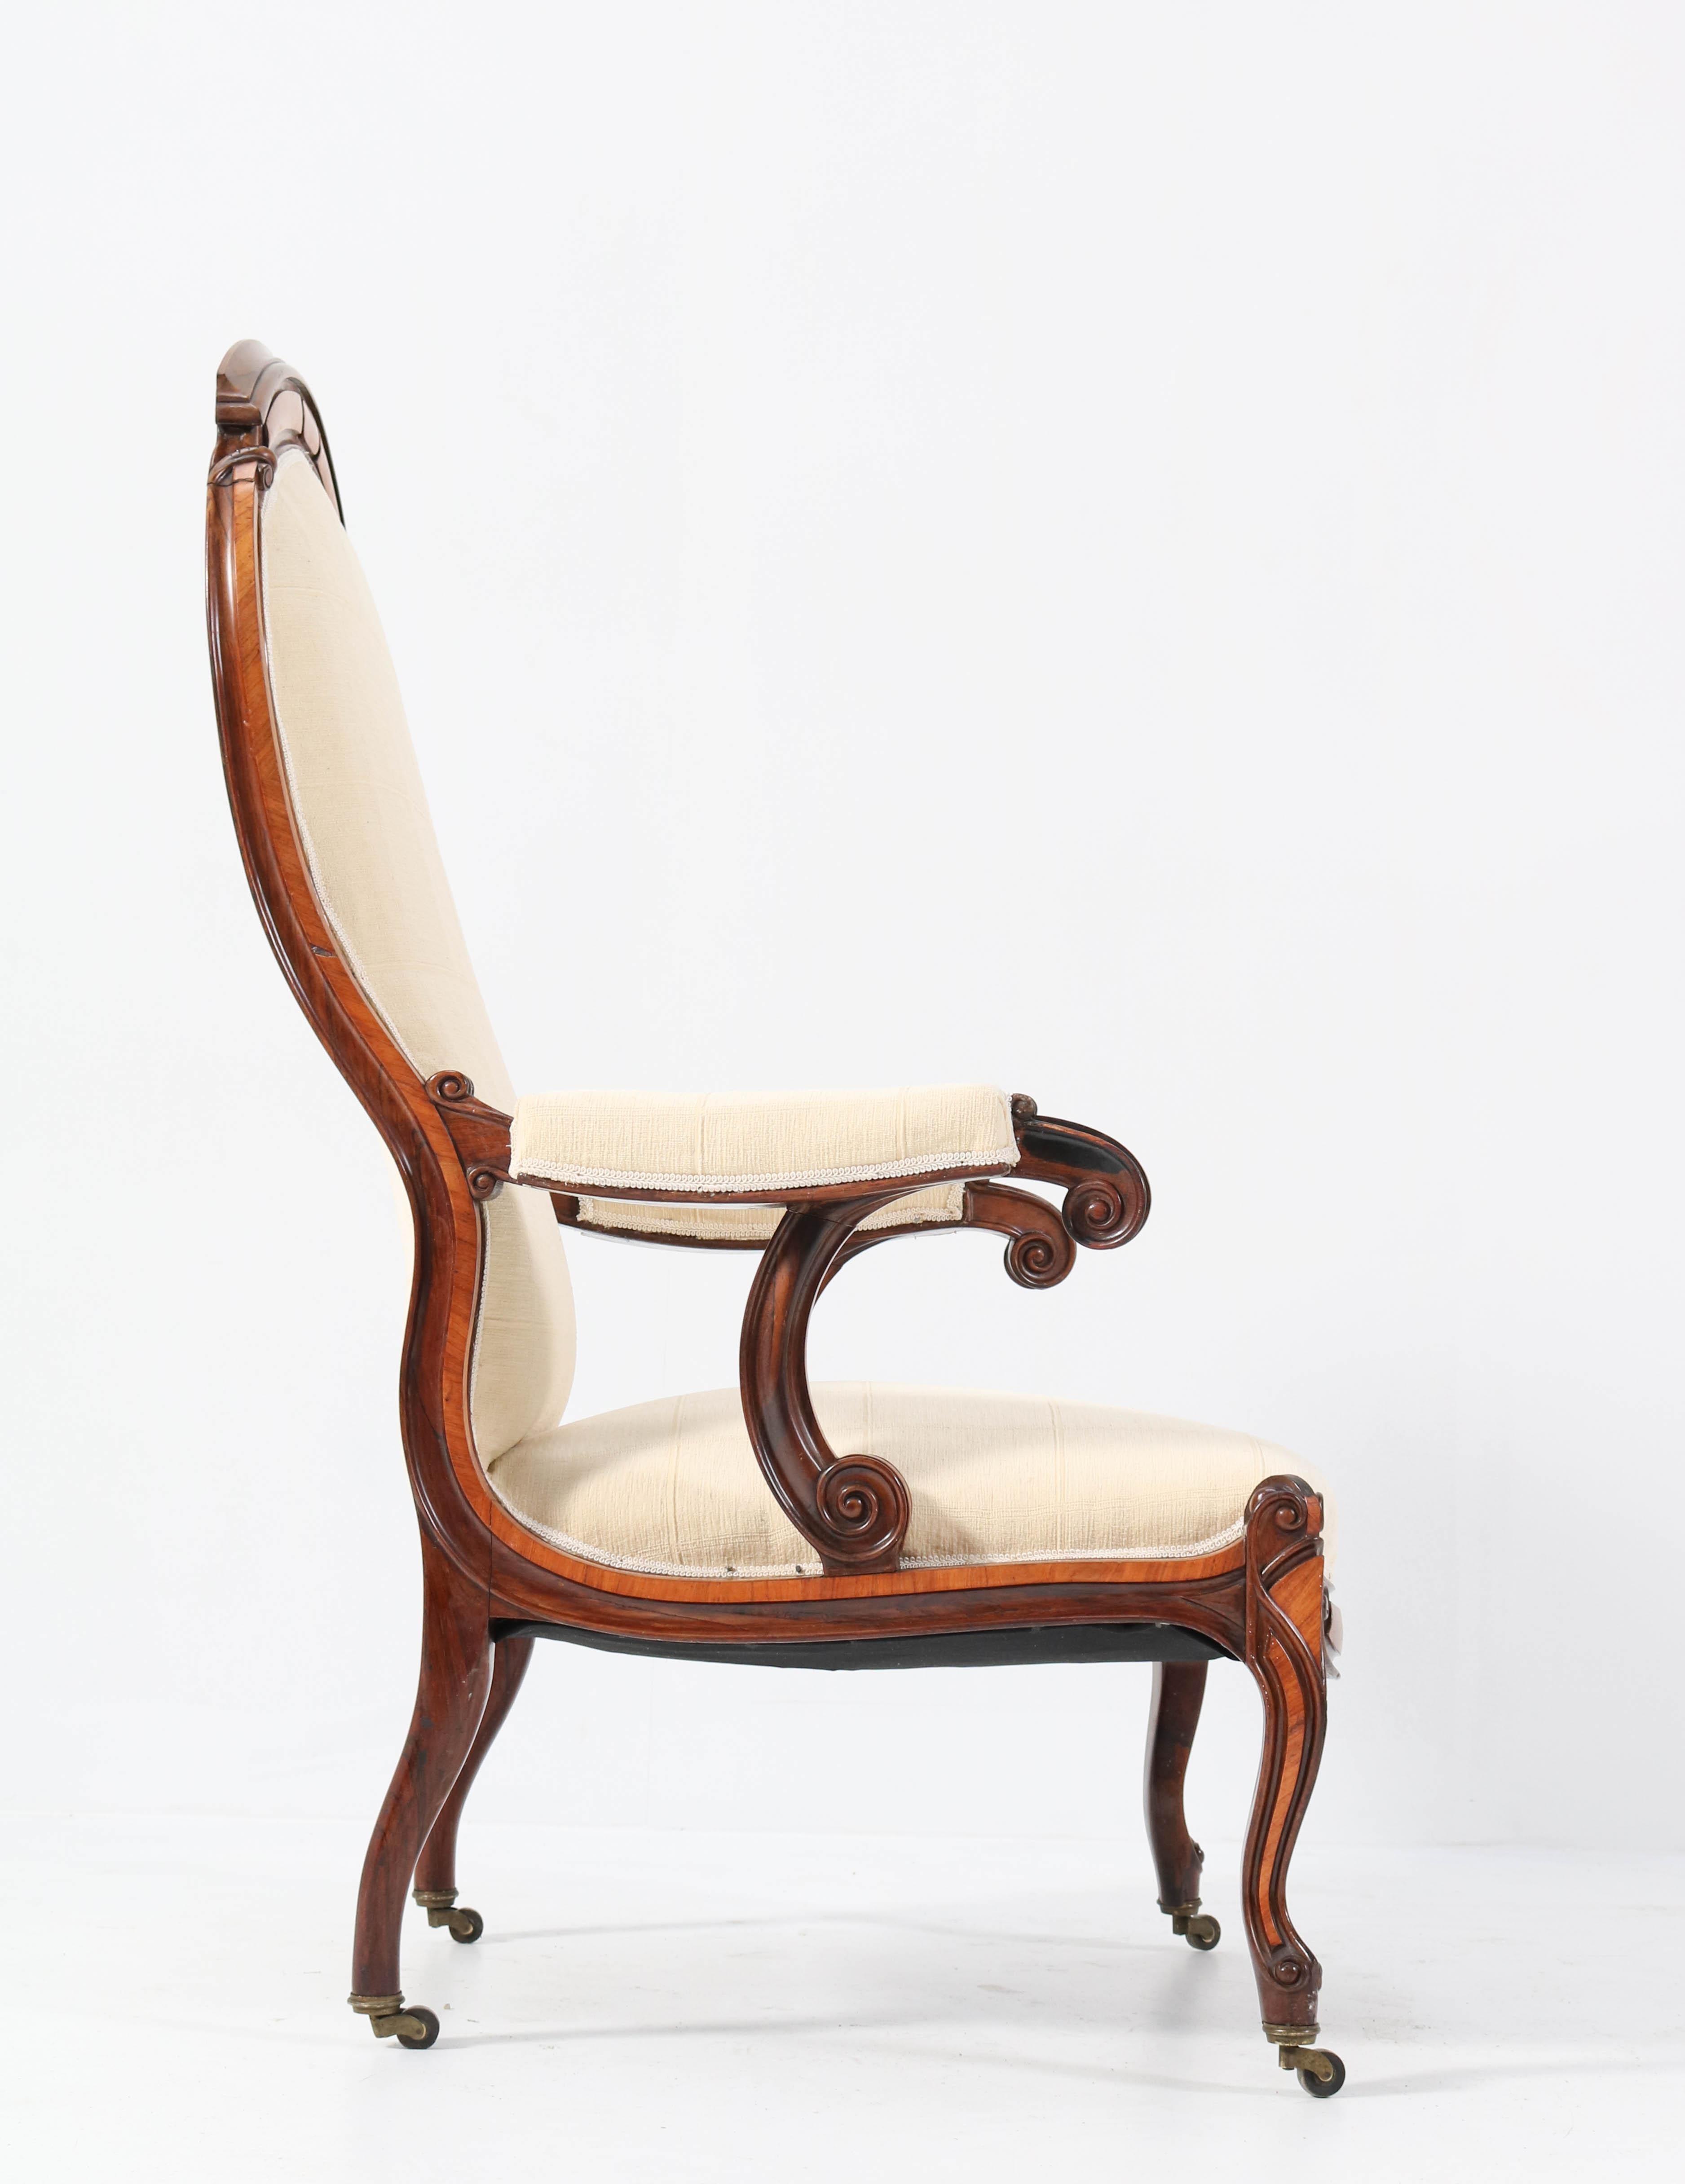 Satinwood Victorian High Back Armchair or Voltaire Chair, 1860s For Sale 8